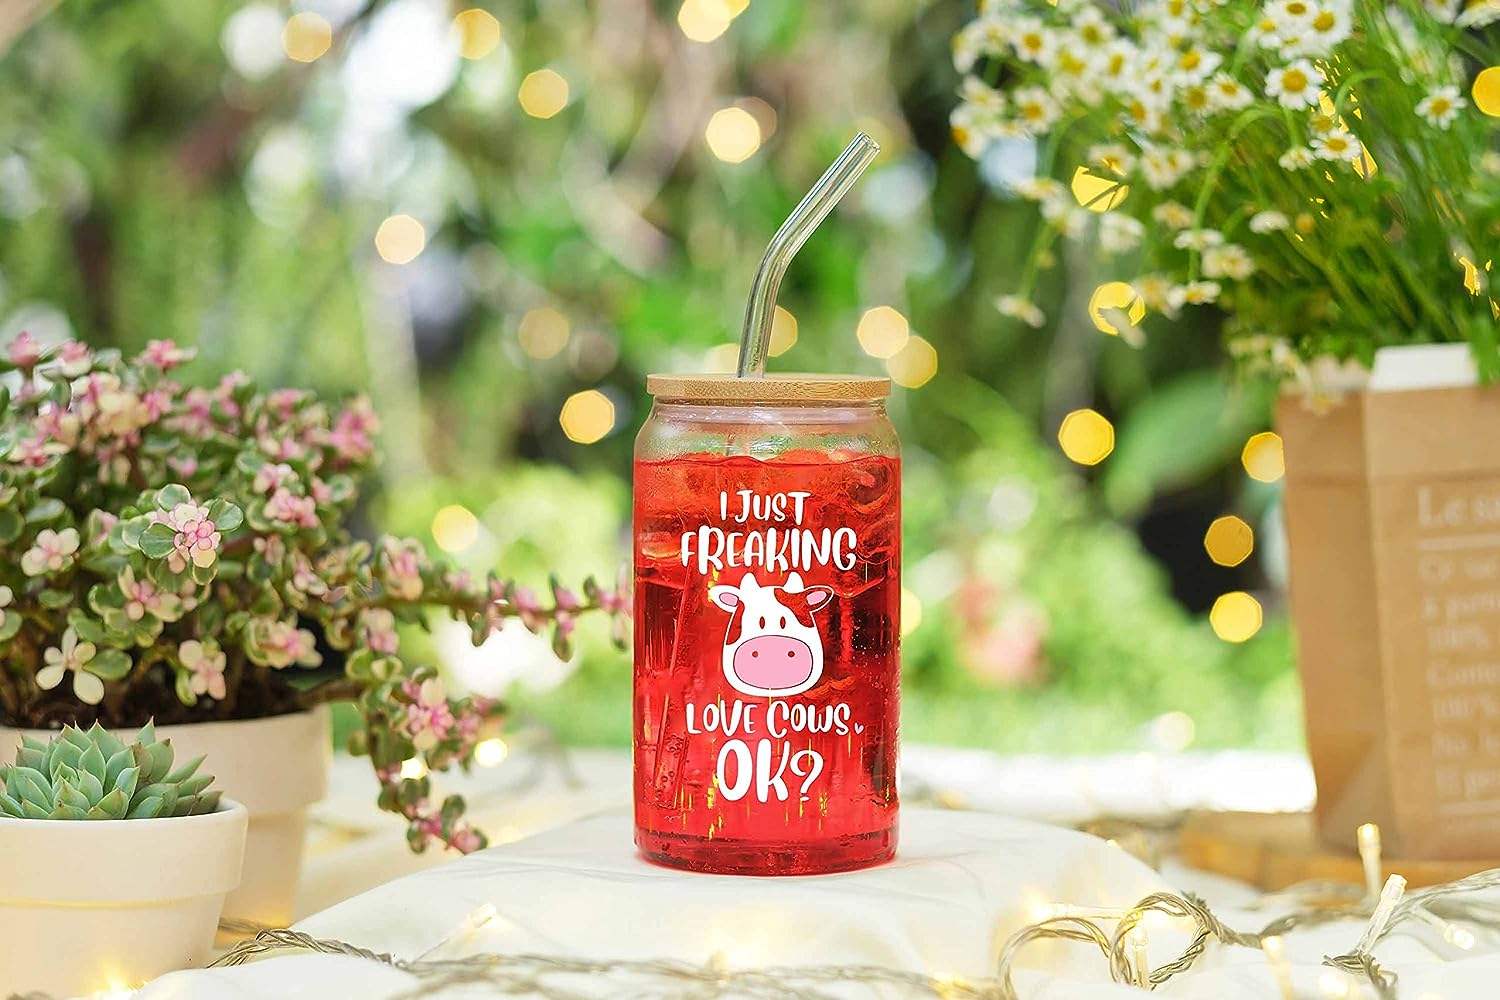 I Just Freaking Love Cows - 16 Oz Coffee Glass